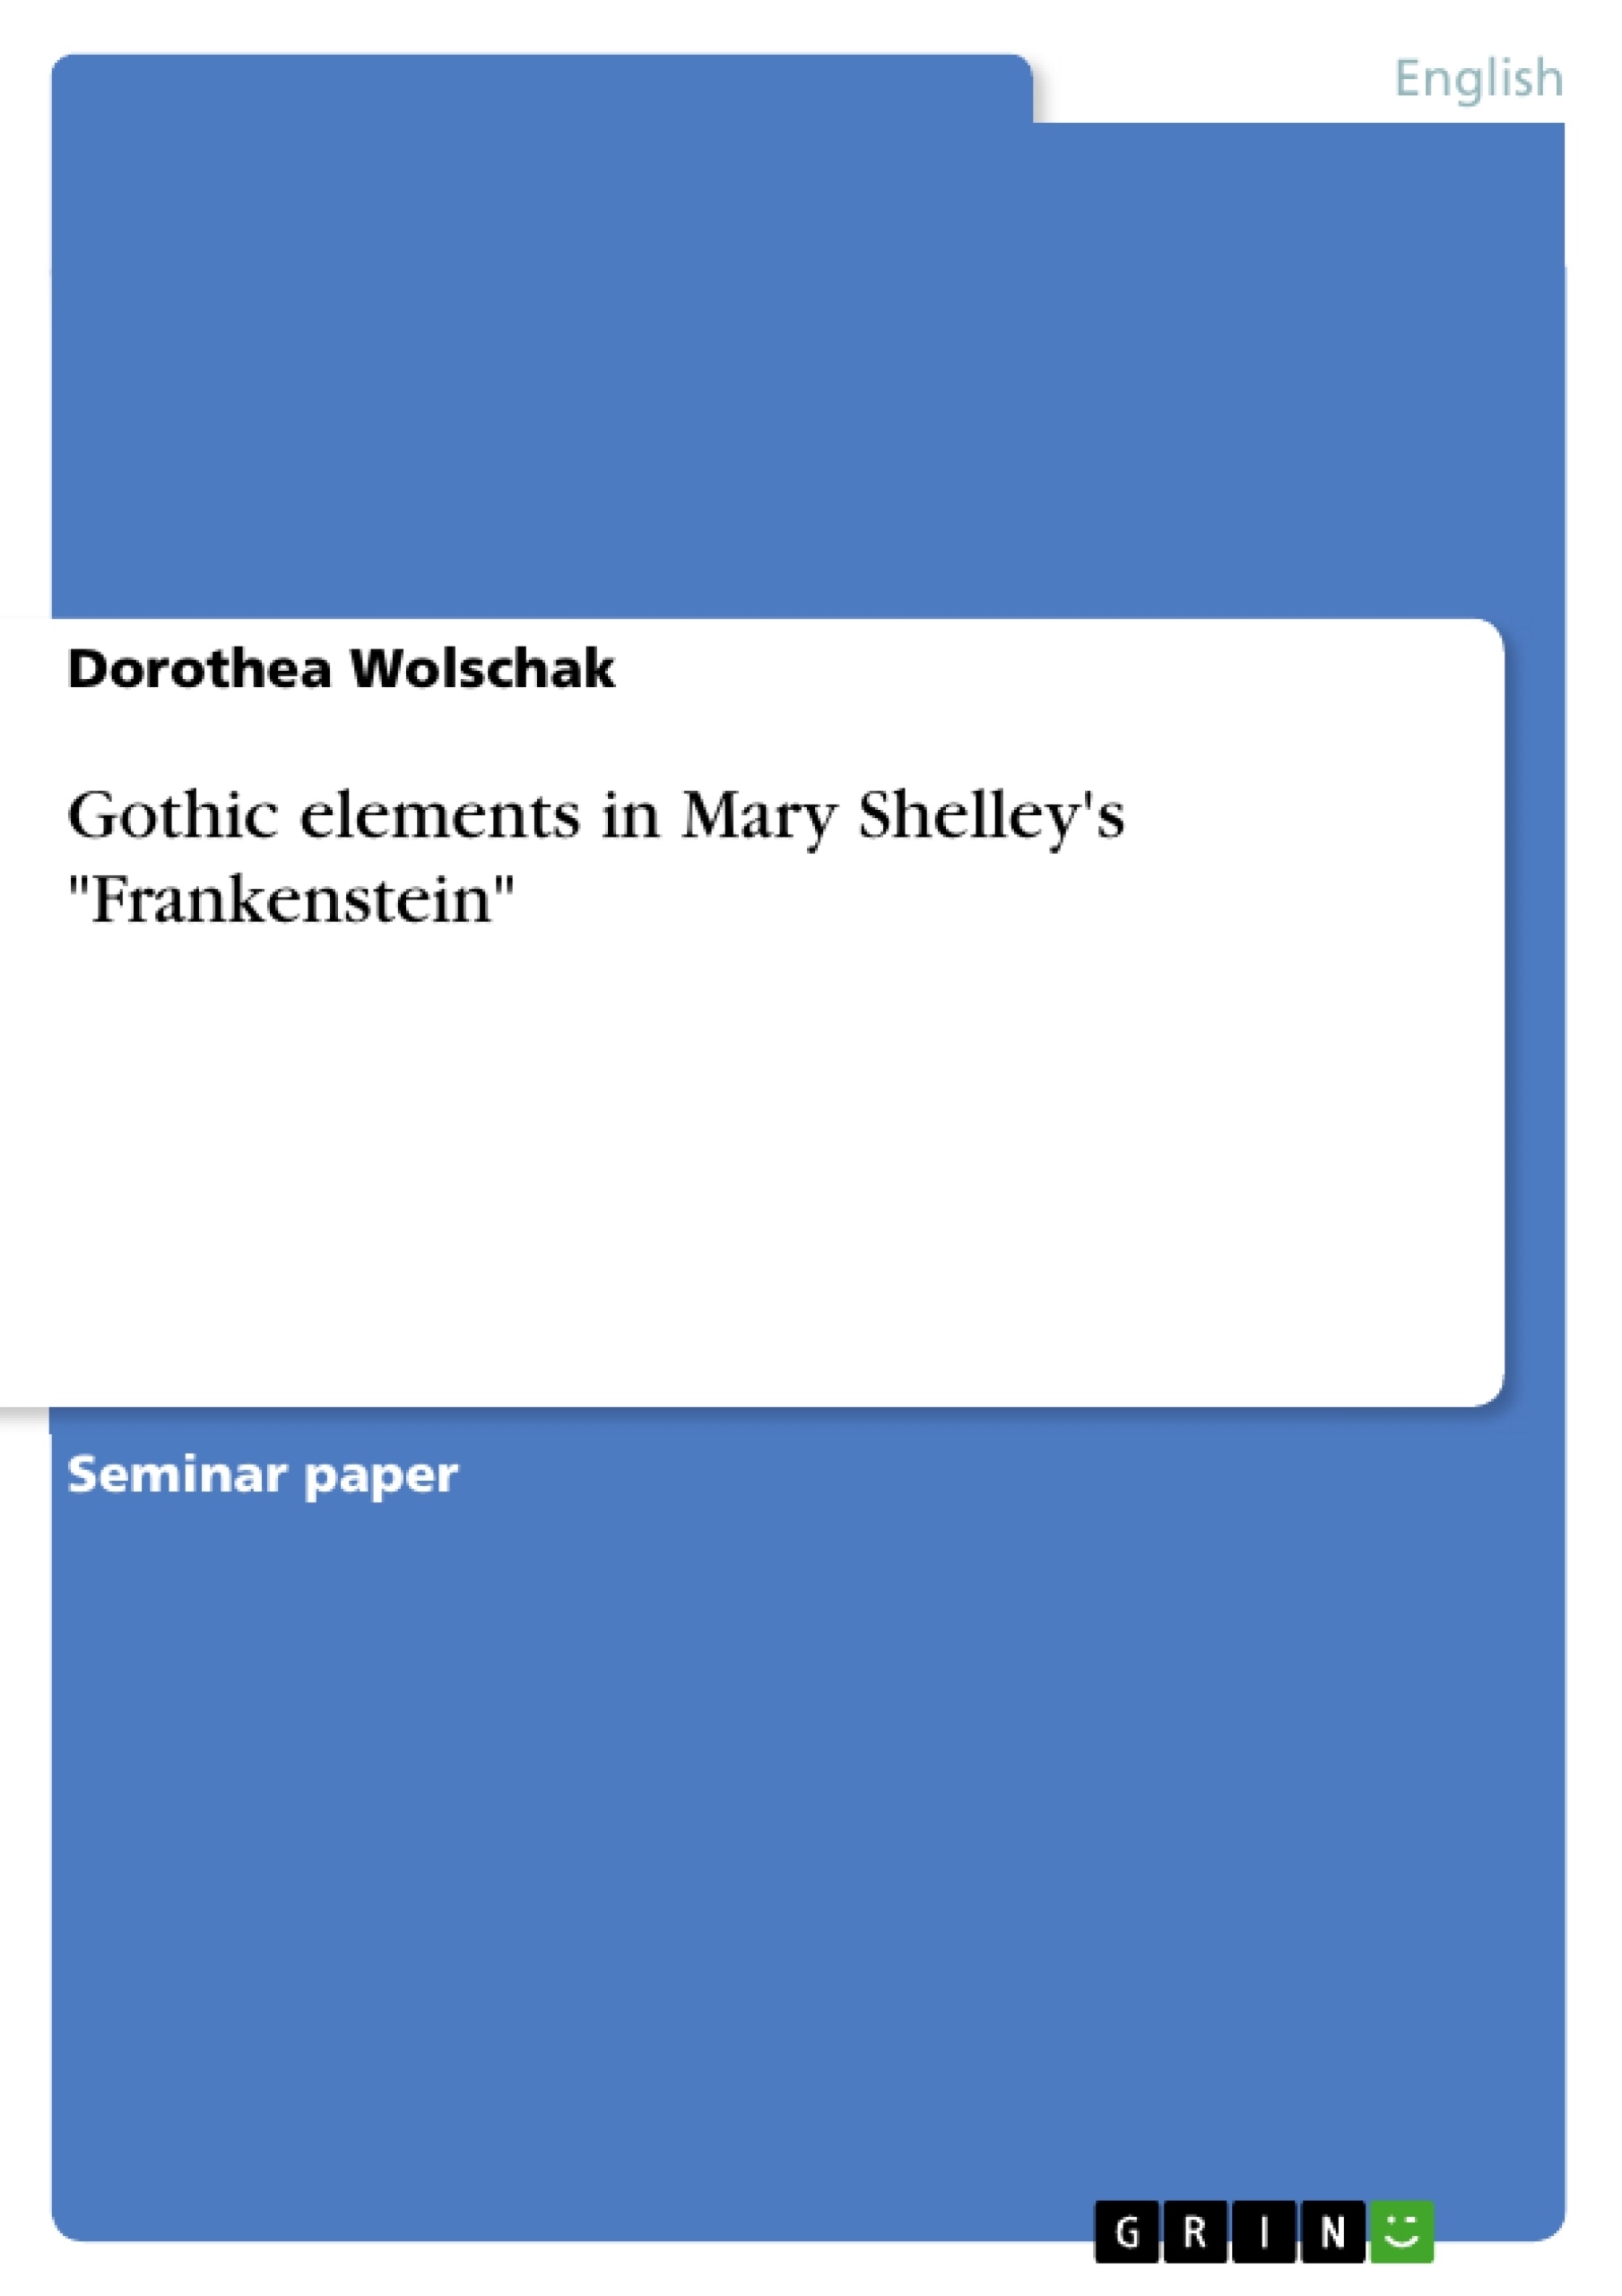 Título: Gothic elements in Mary Shelley's "Frankenstein"